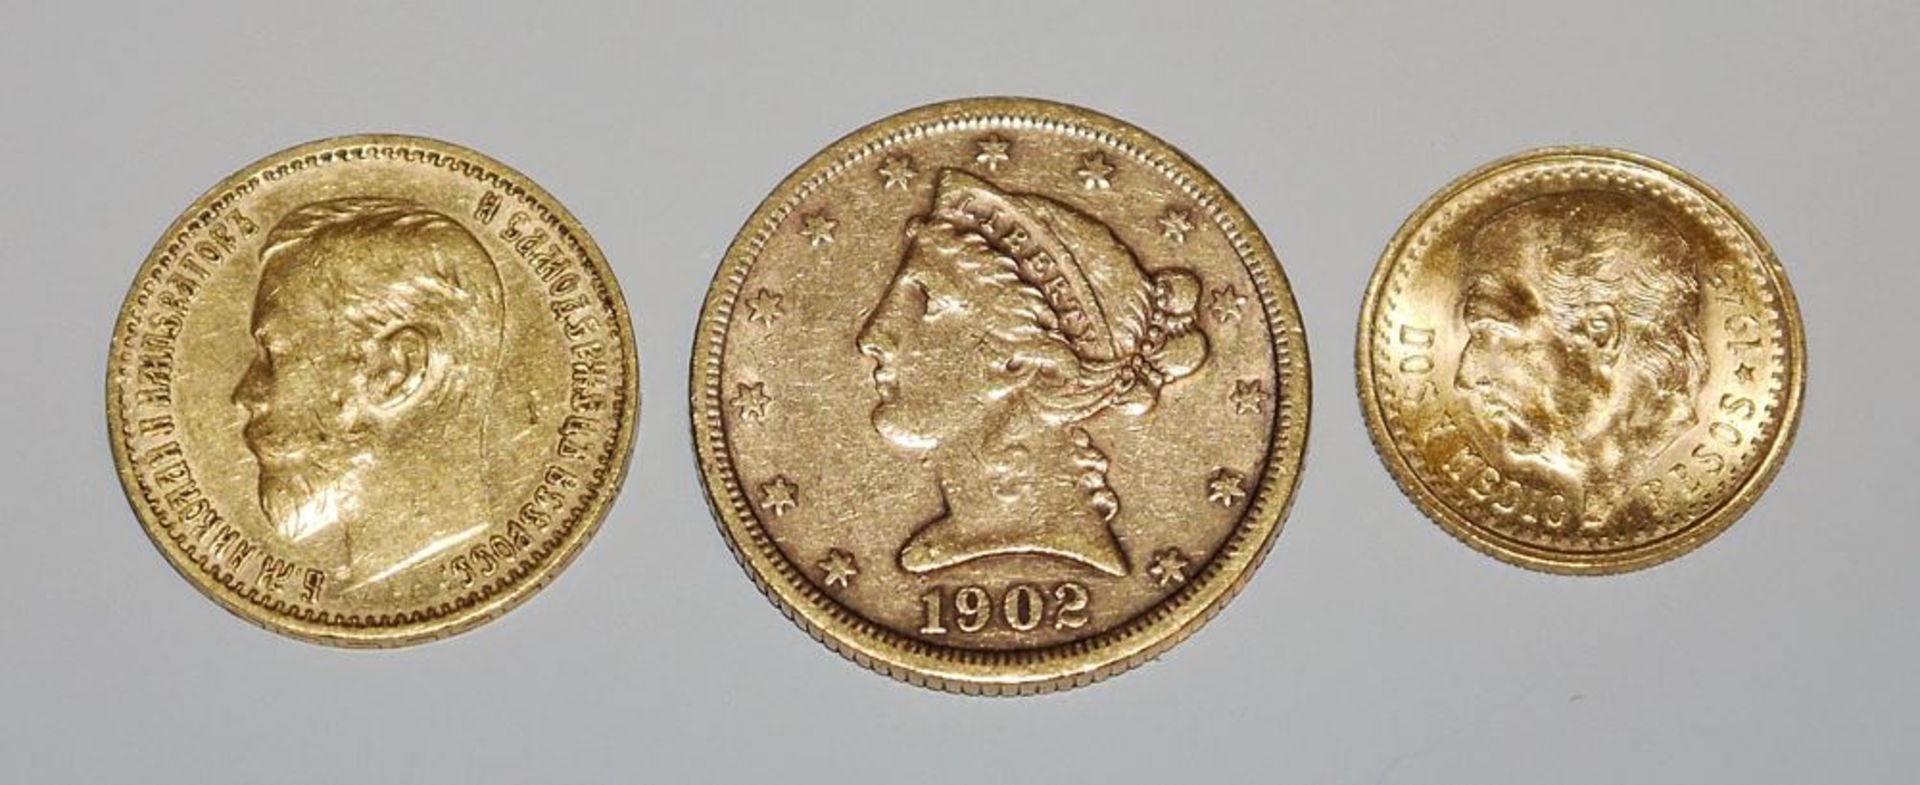 Three gold münzen 5 dollars, USA 1902, 5 roubles, Russia 1898 and 2 1/2 pesos, Mexico 1945